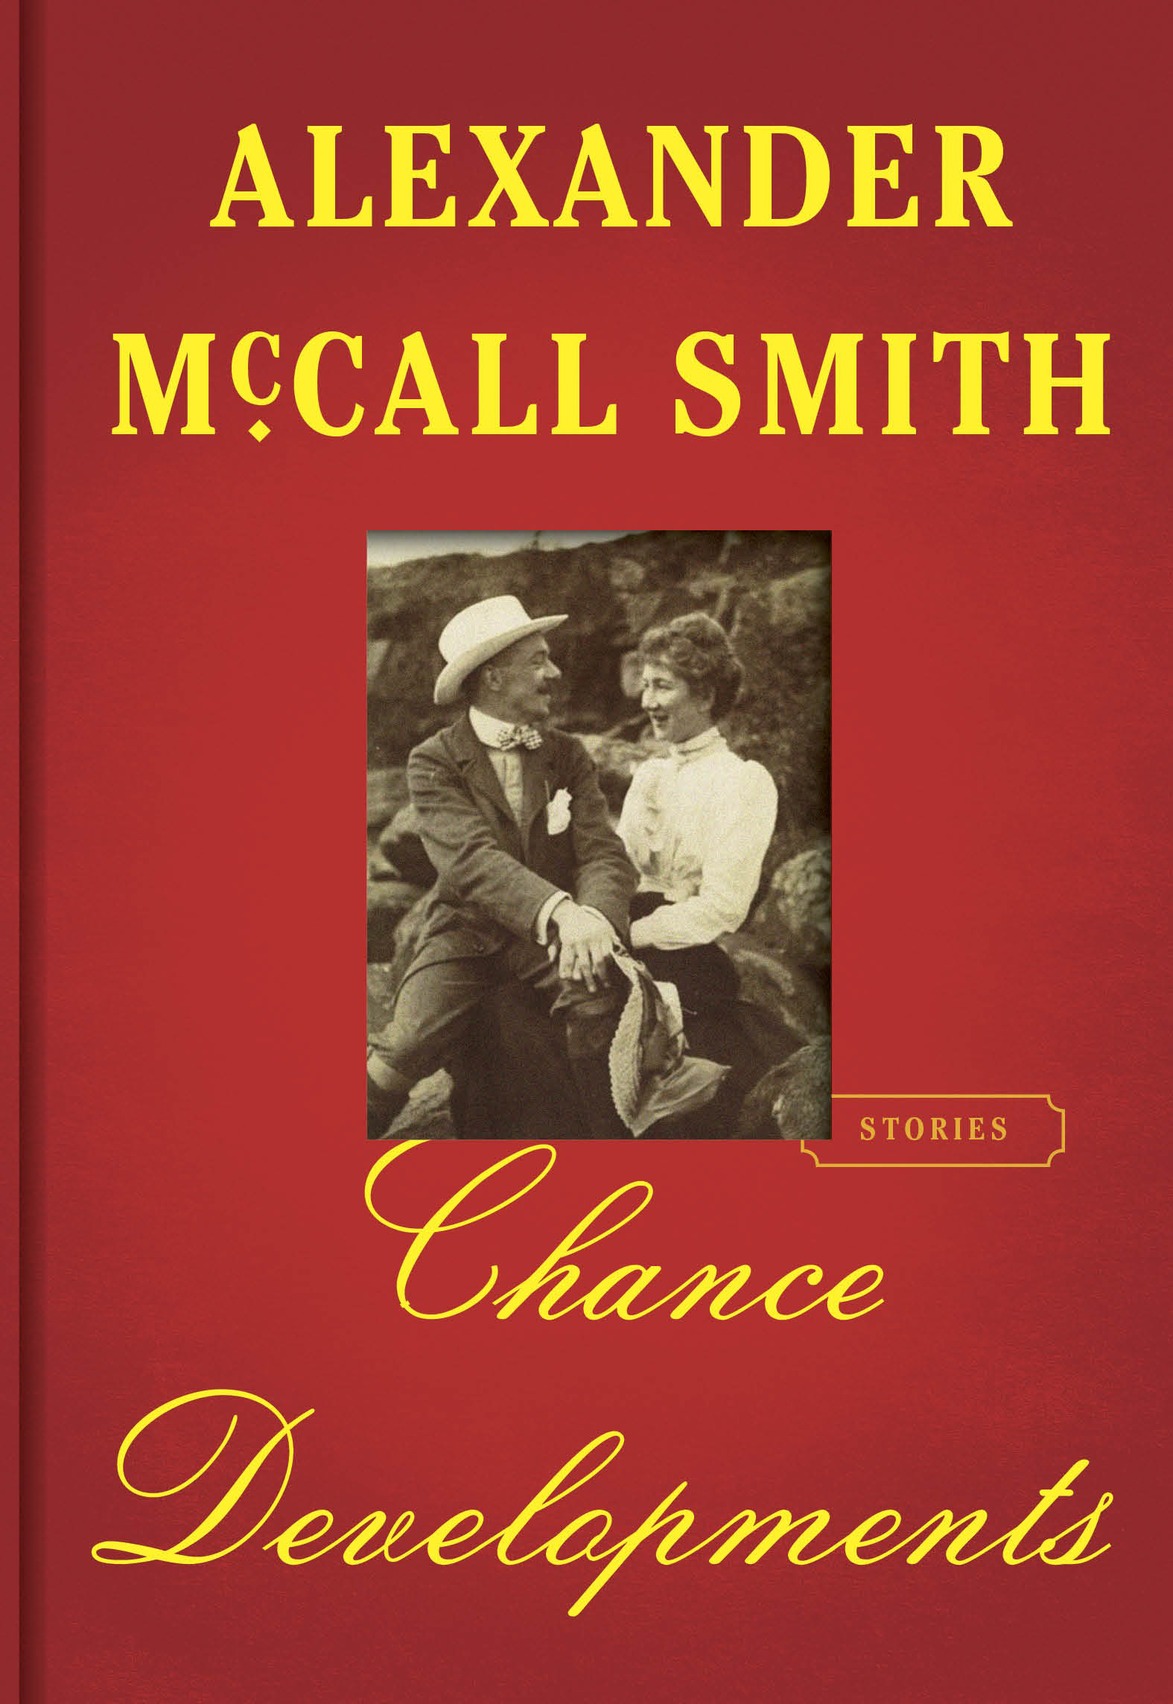 Chance Developments (2016) by Alexander McCall Smith